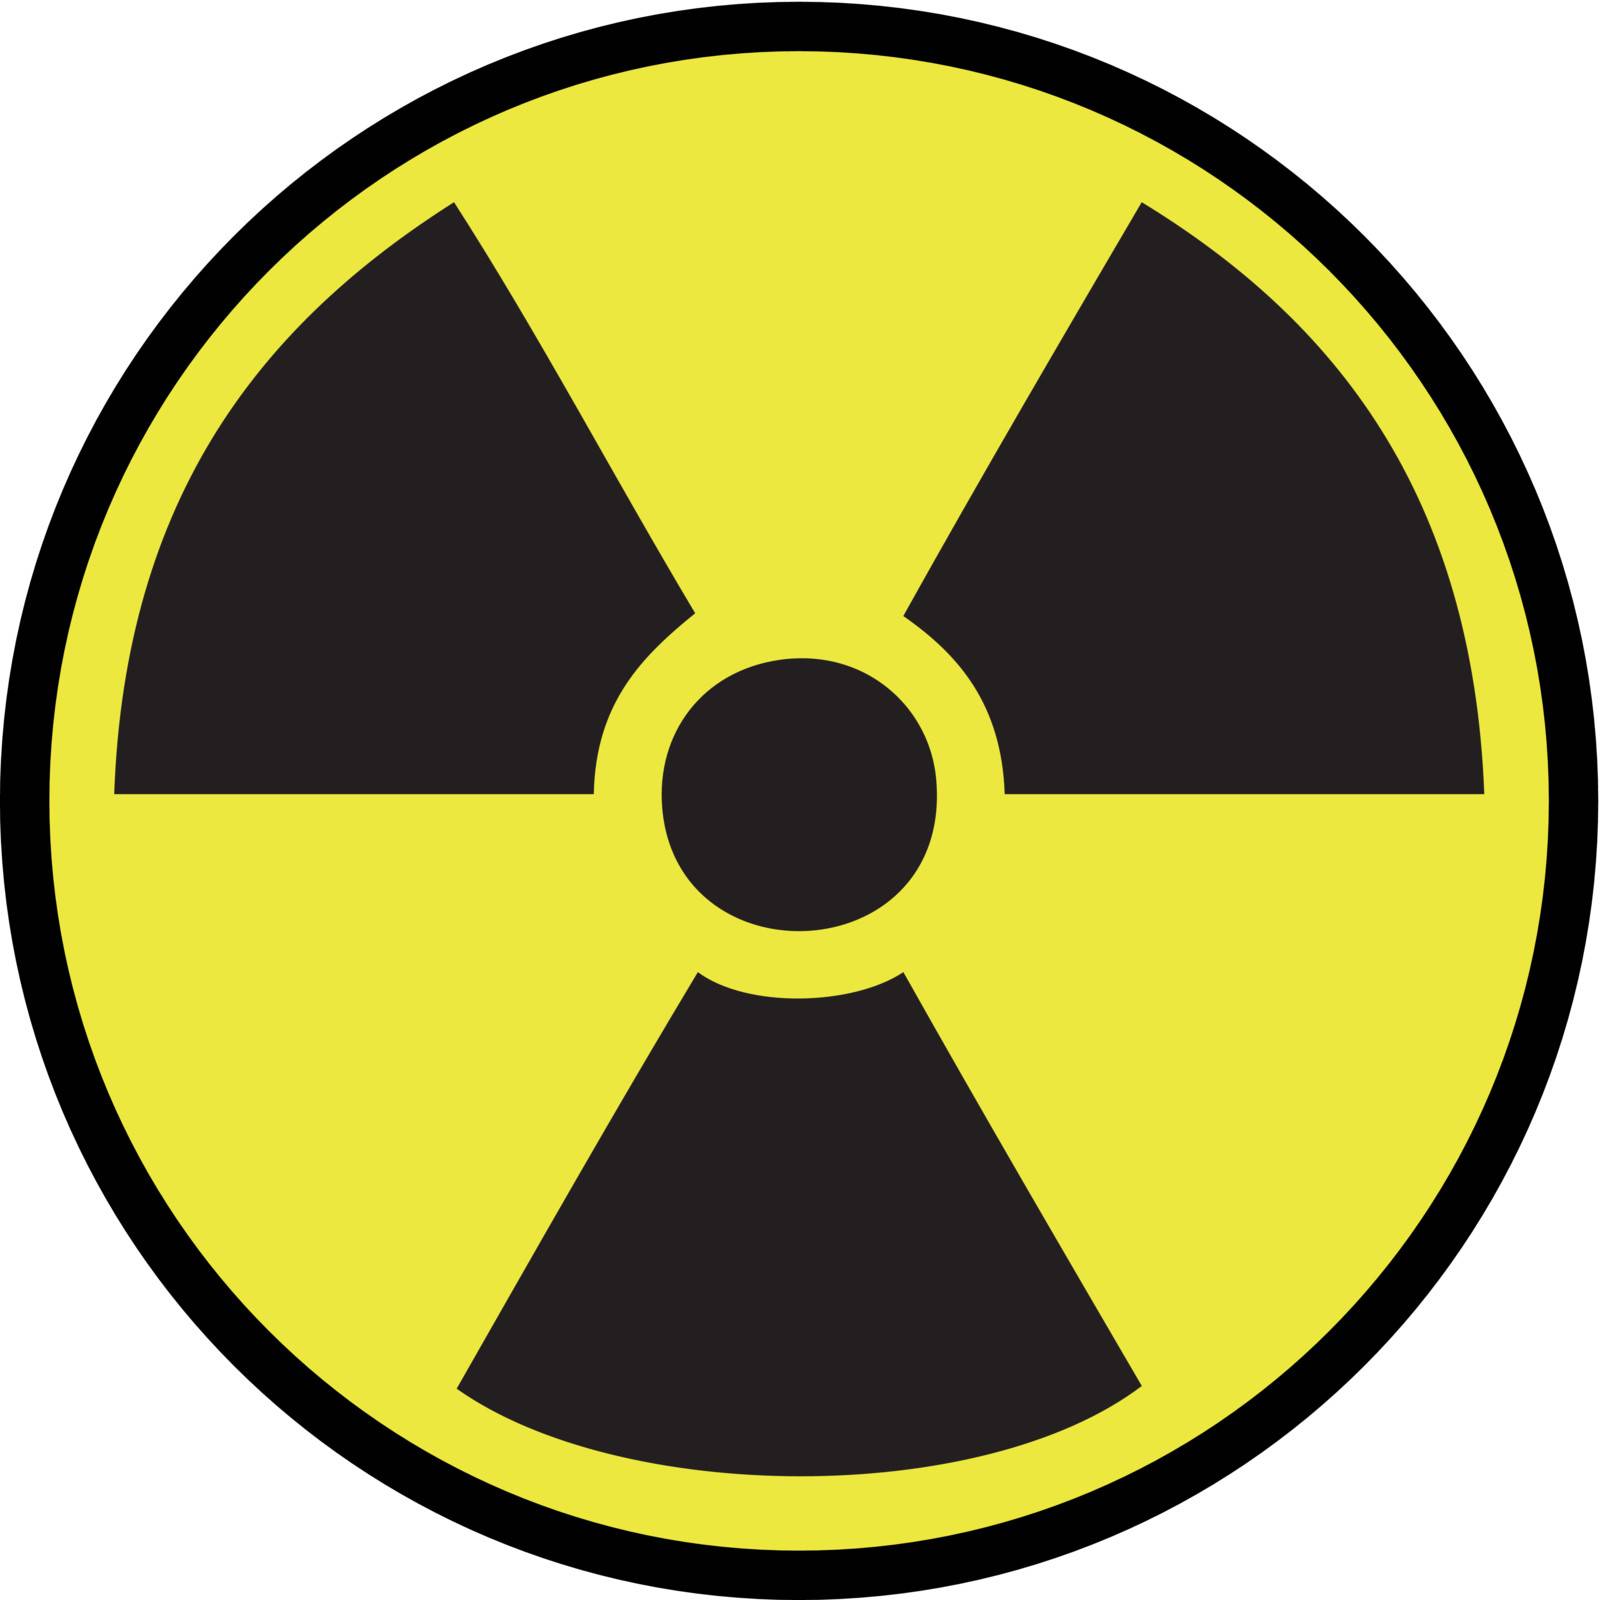 Sign of danger of radiation and radioactive contamination